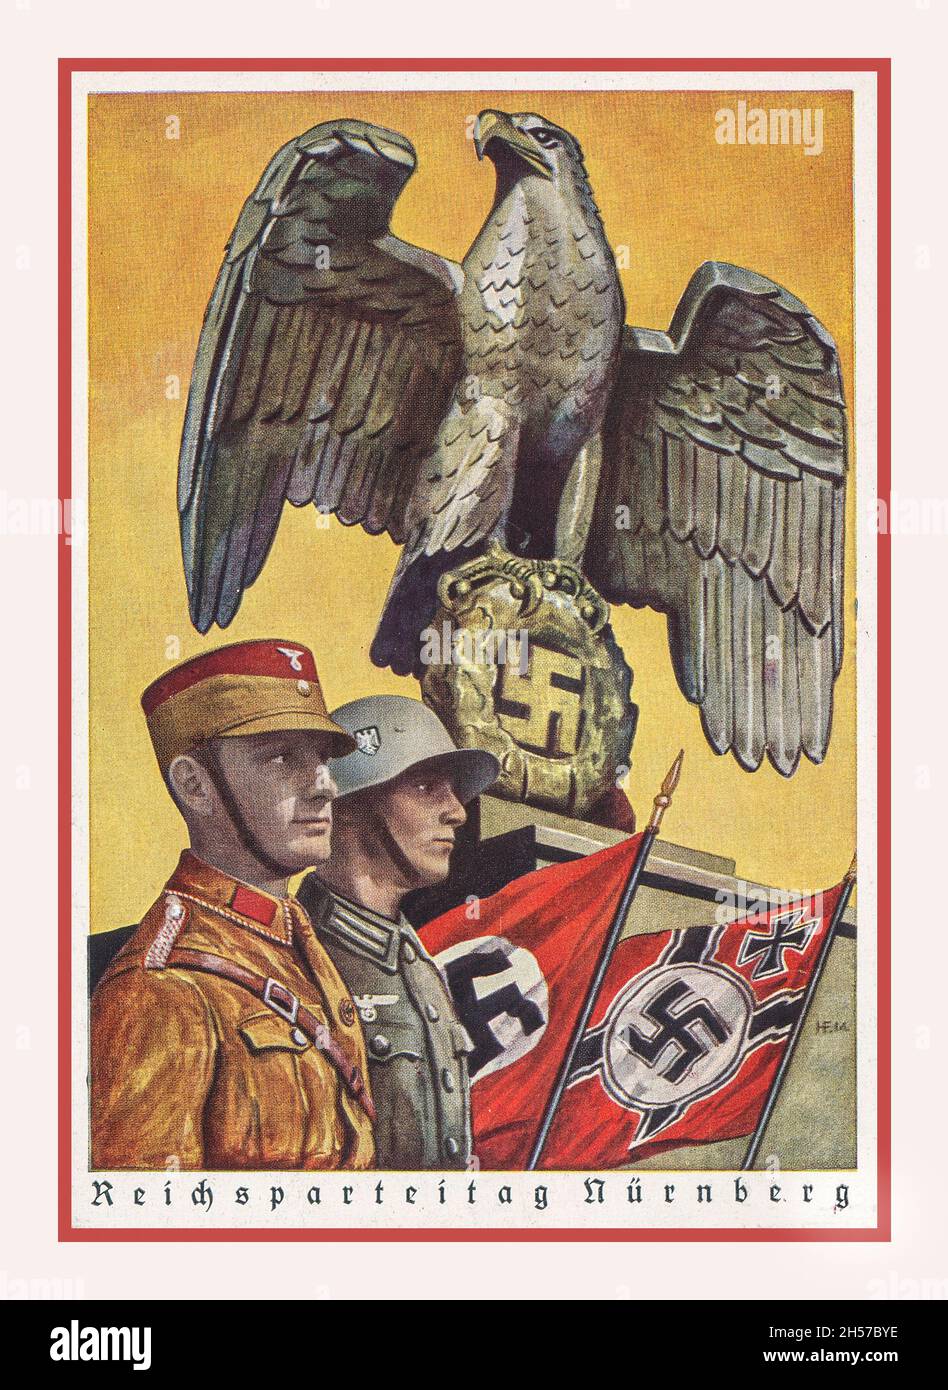 REICHSPARTEITAG NÜRNBERG 1939, German Eagle and swastika symbol with German Wehrmacht soldier alongside a brown shirt SA 'Sturmabteilung'  storm trooper para military Stock Photo